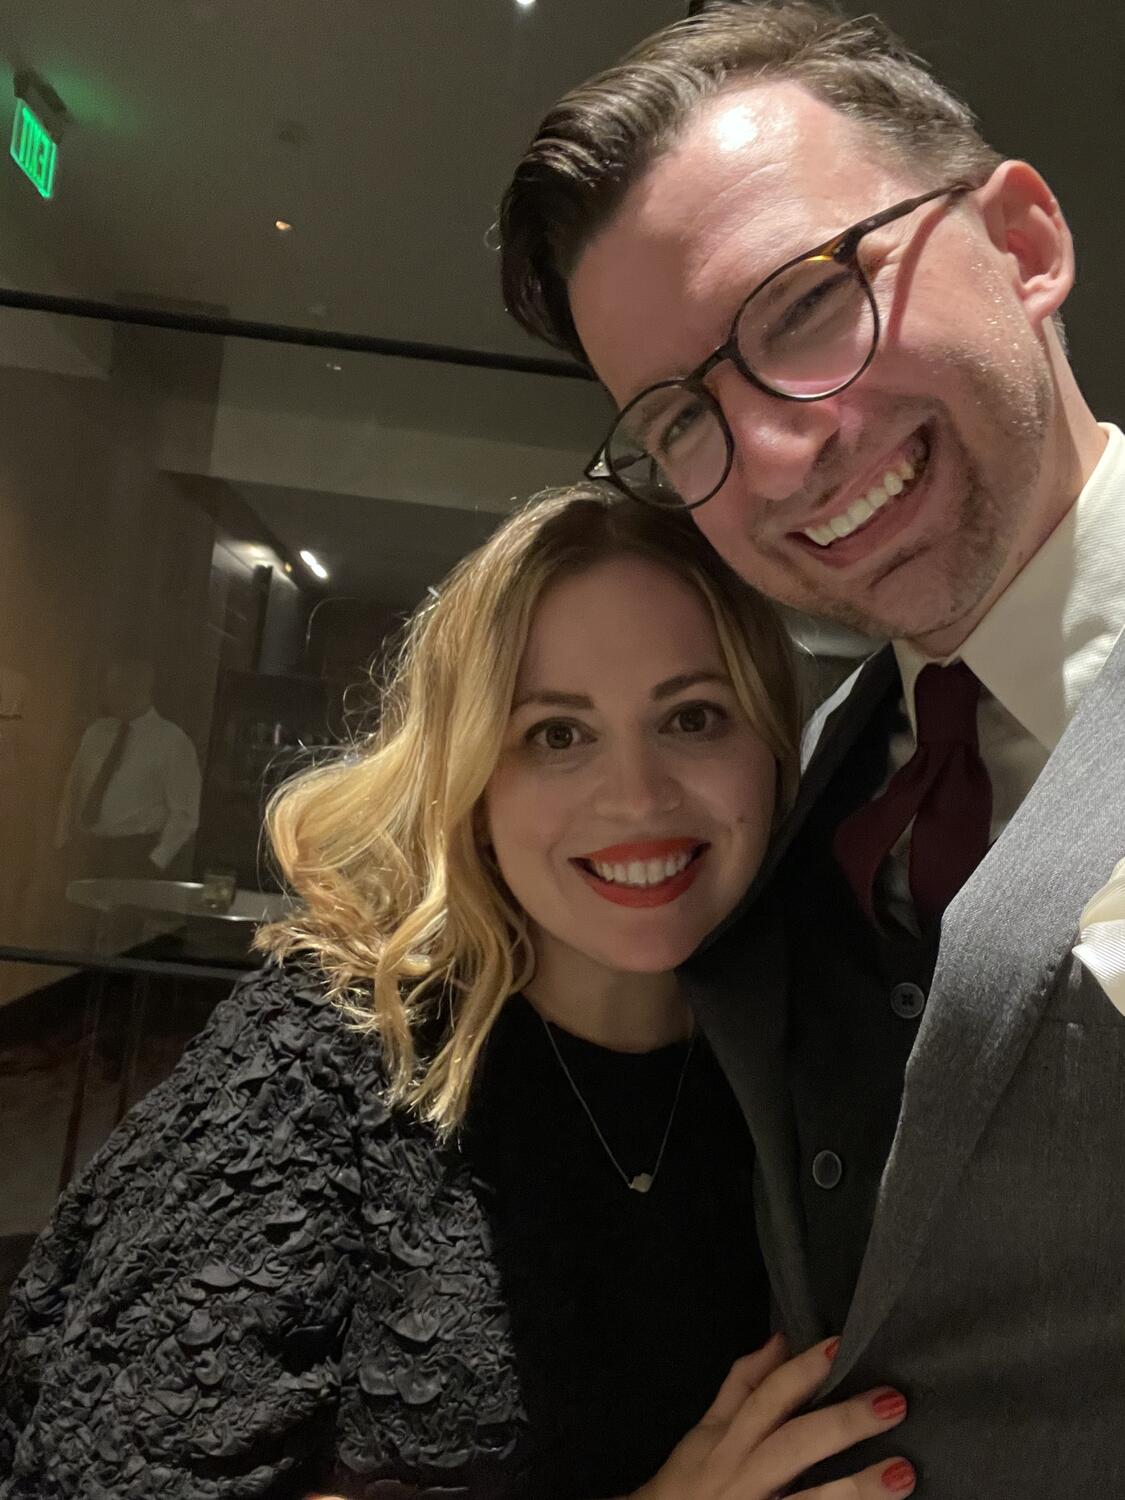 Me and Amy taking a selfie in a dark corridor of a fancy hotel. She's looking great in a black dress, I have on a grey suit and a burgundy tie and matching sweater